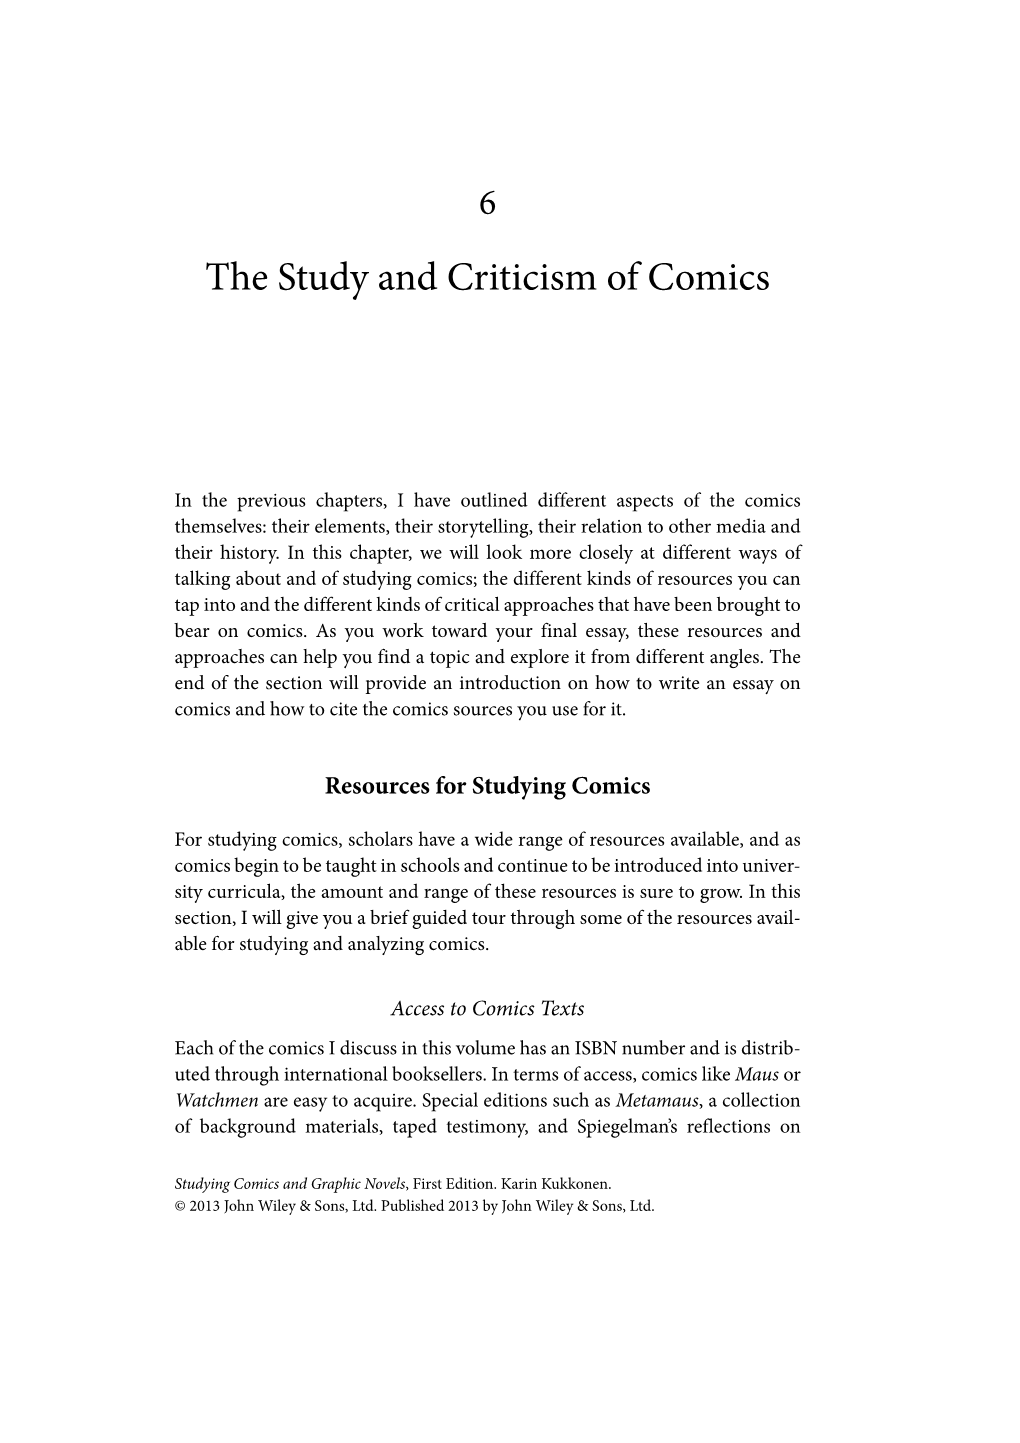 The Study and Criticism of Comics